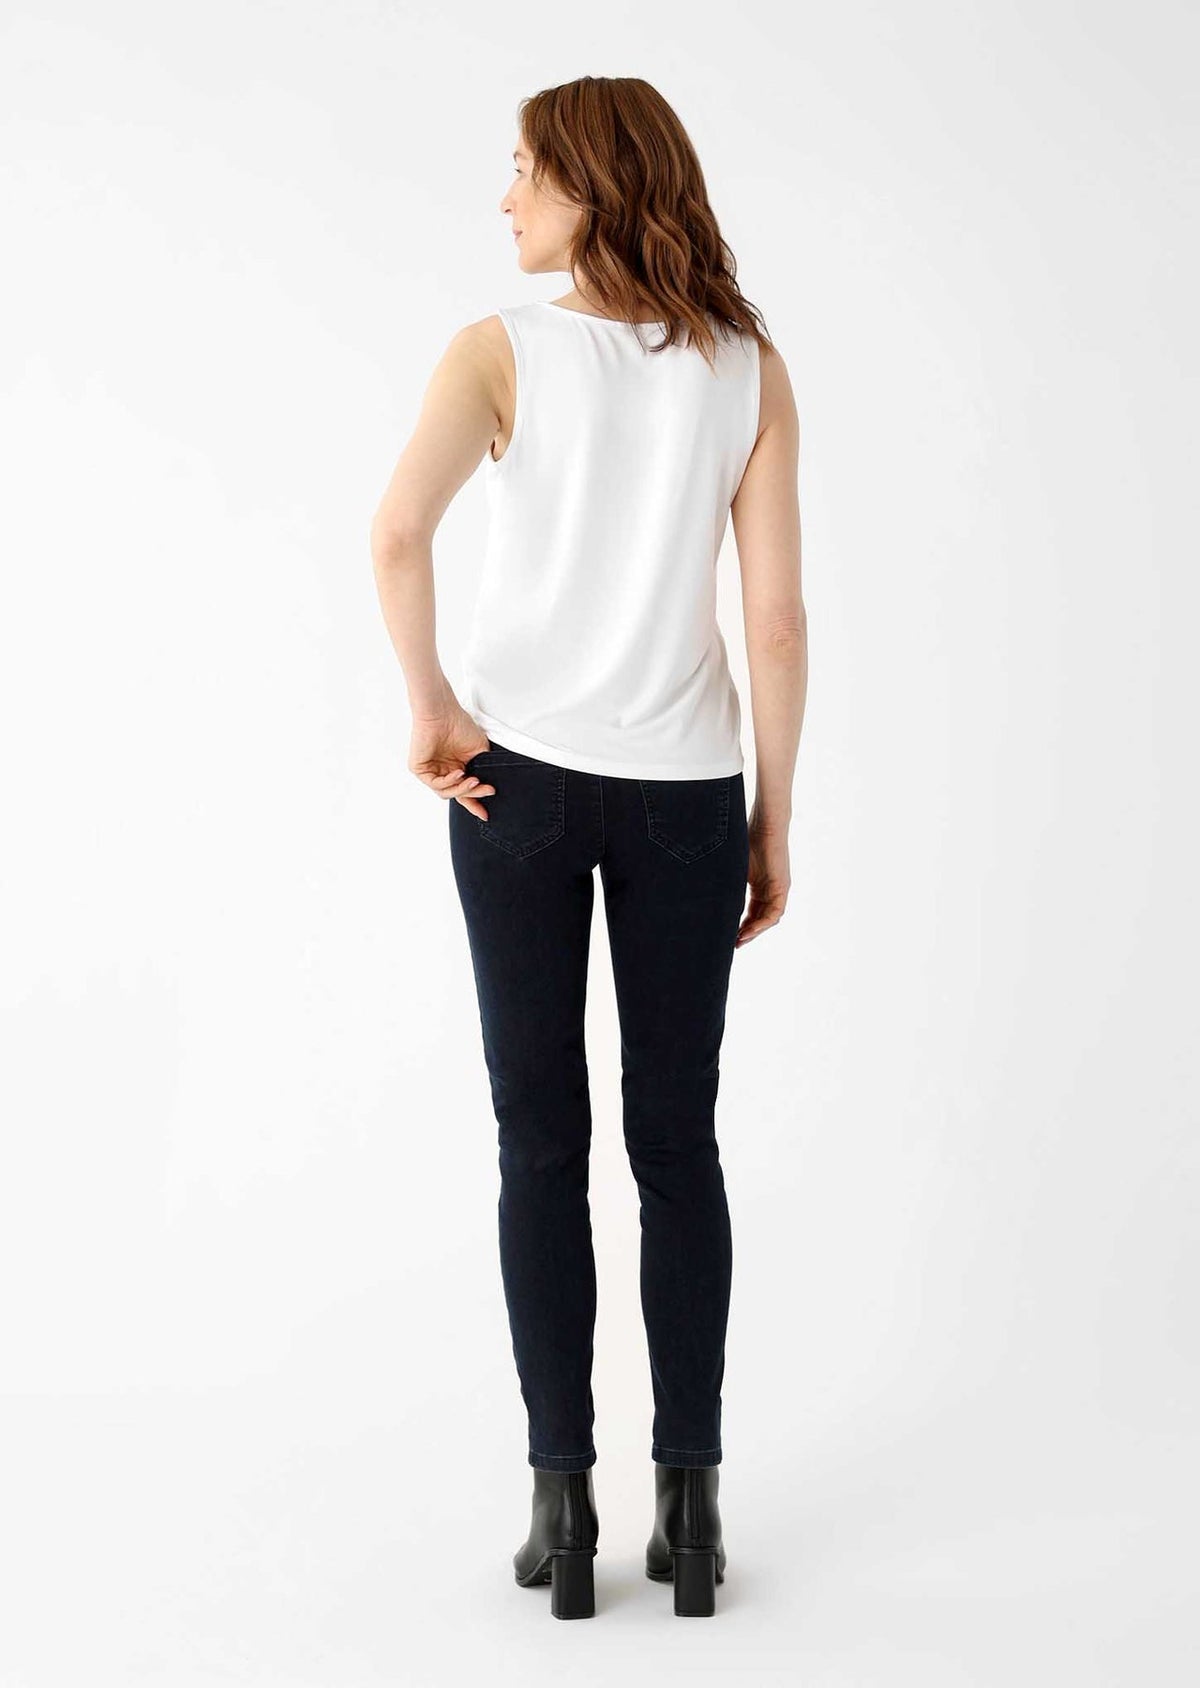 Avery 23" Camisole Lisette L Montreal